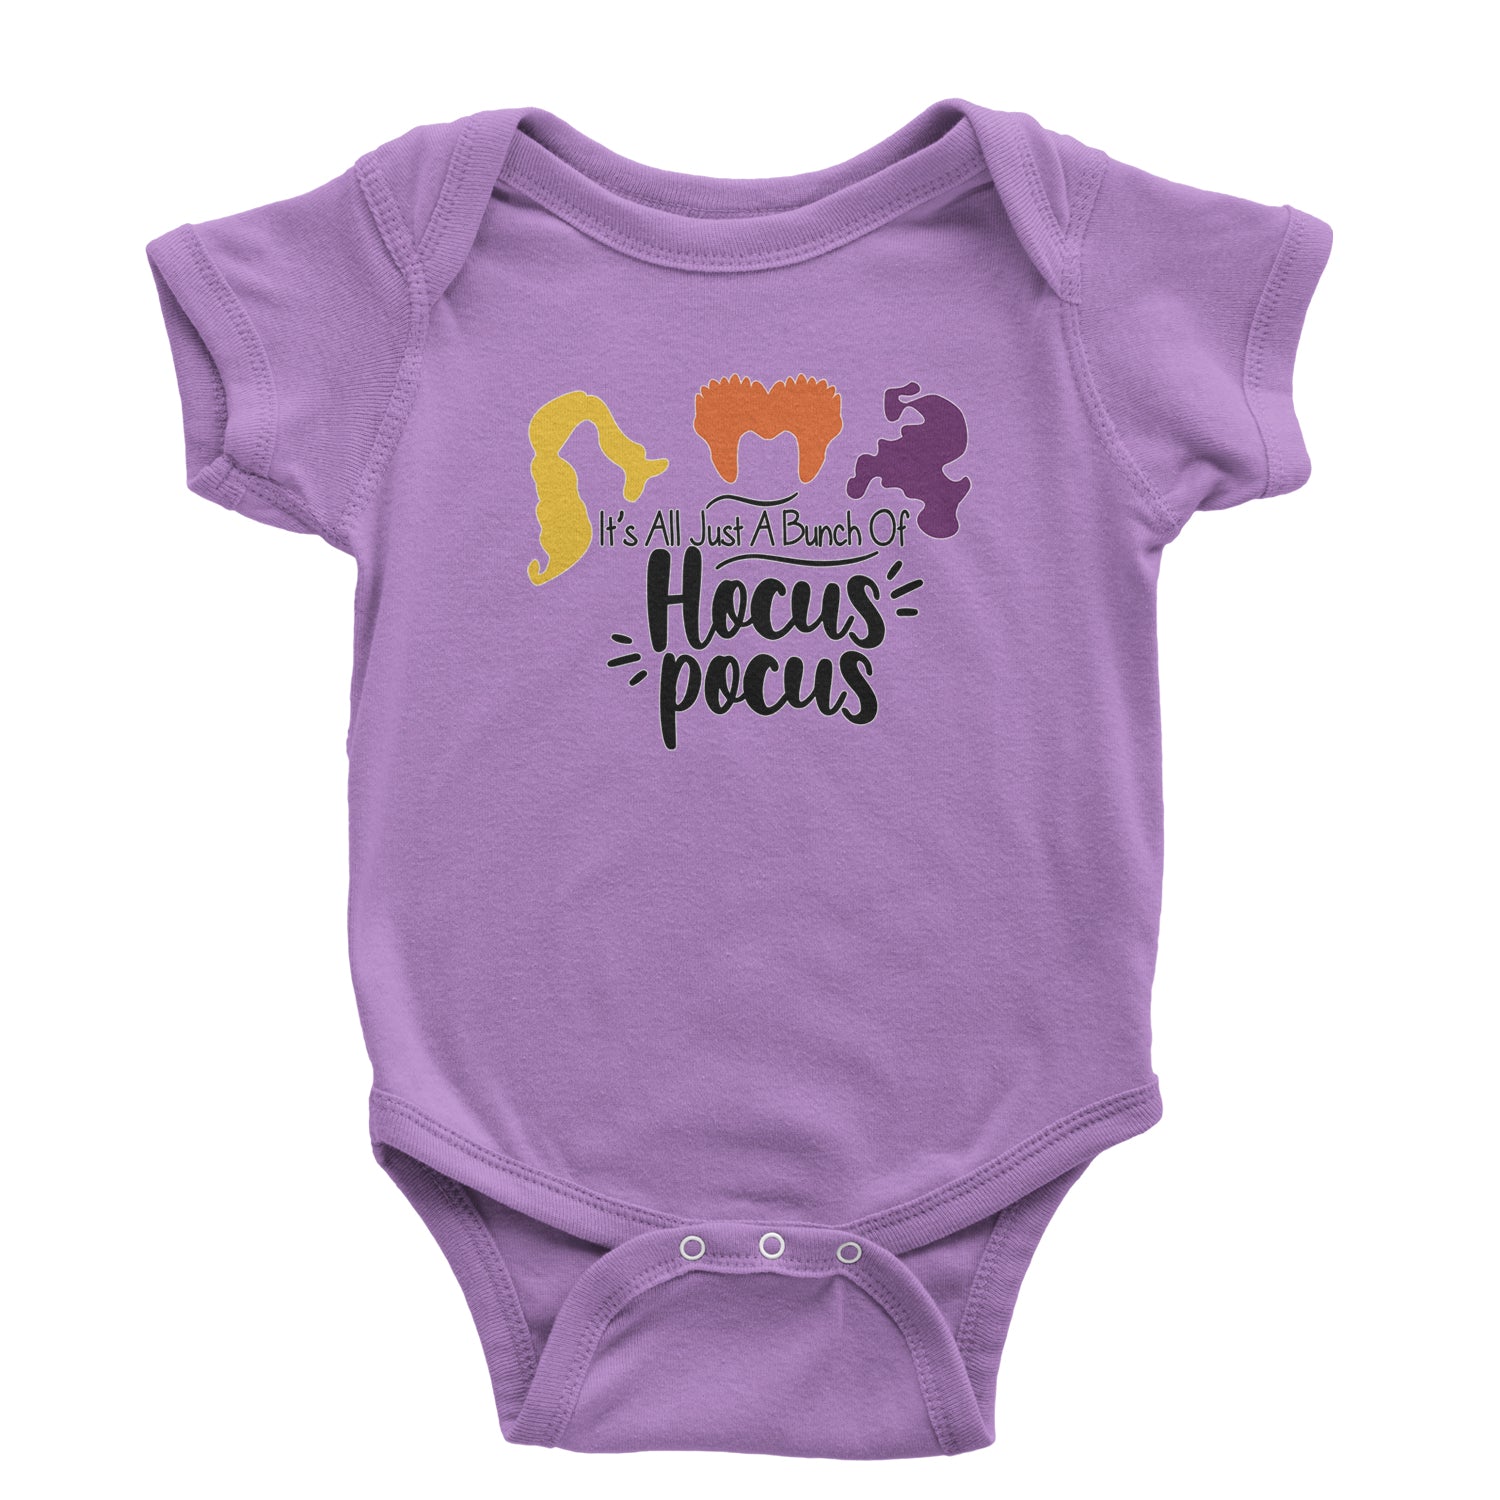 It's Just A Bunch Of Hocus Pocus Infant One-Piece Romper Bodysuit and Toddler T-shirt descendants, enchanted, eve, hallows, hocus, or, pocus, sanderson, sisters, treat, trick, witches by Expression Tees